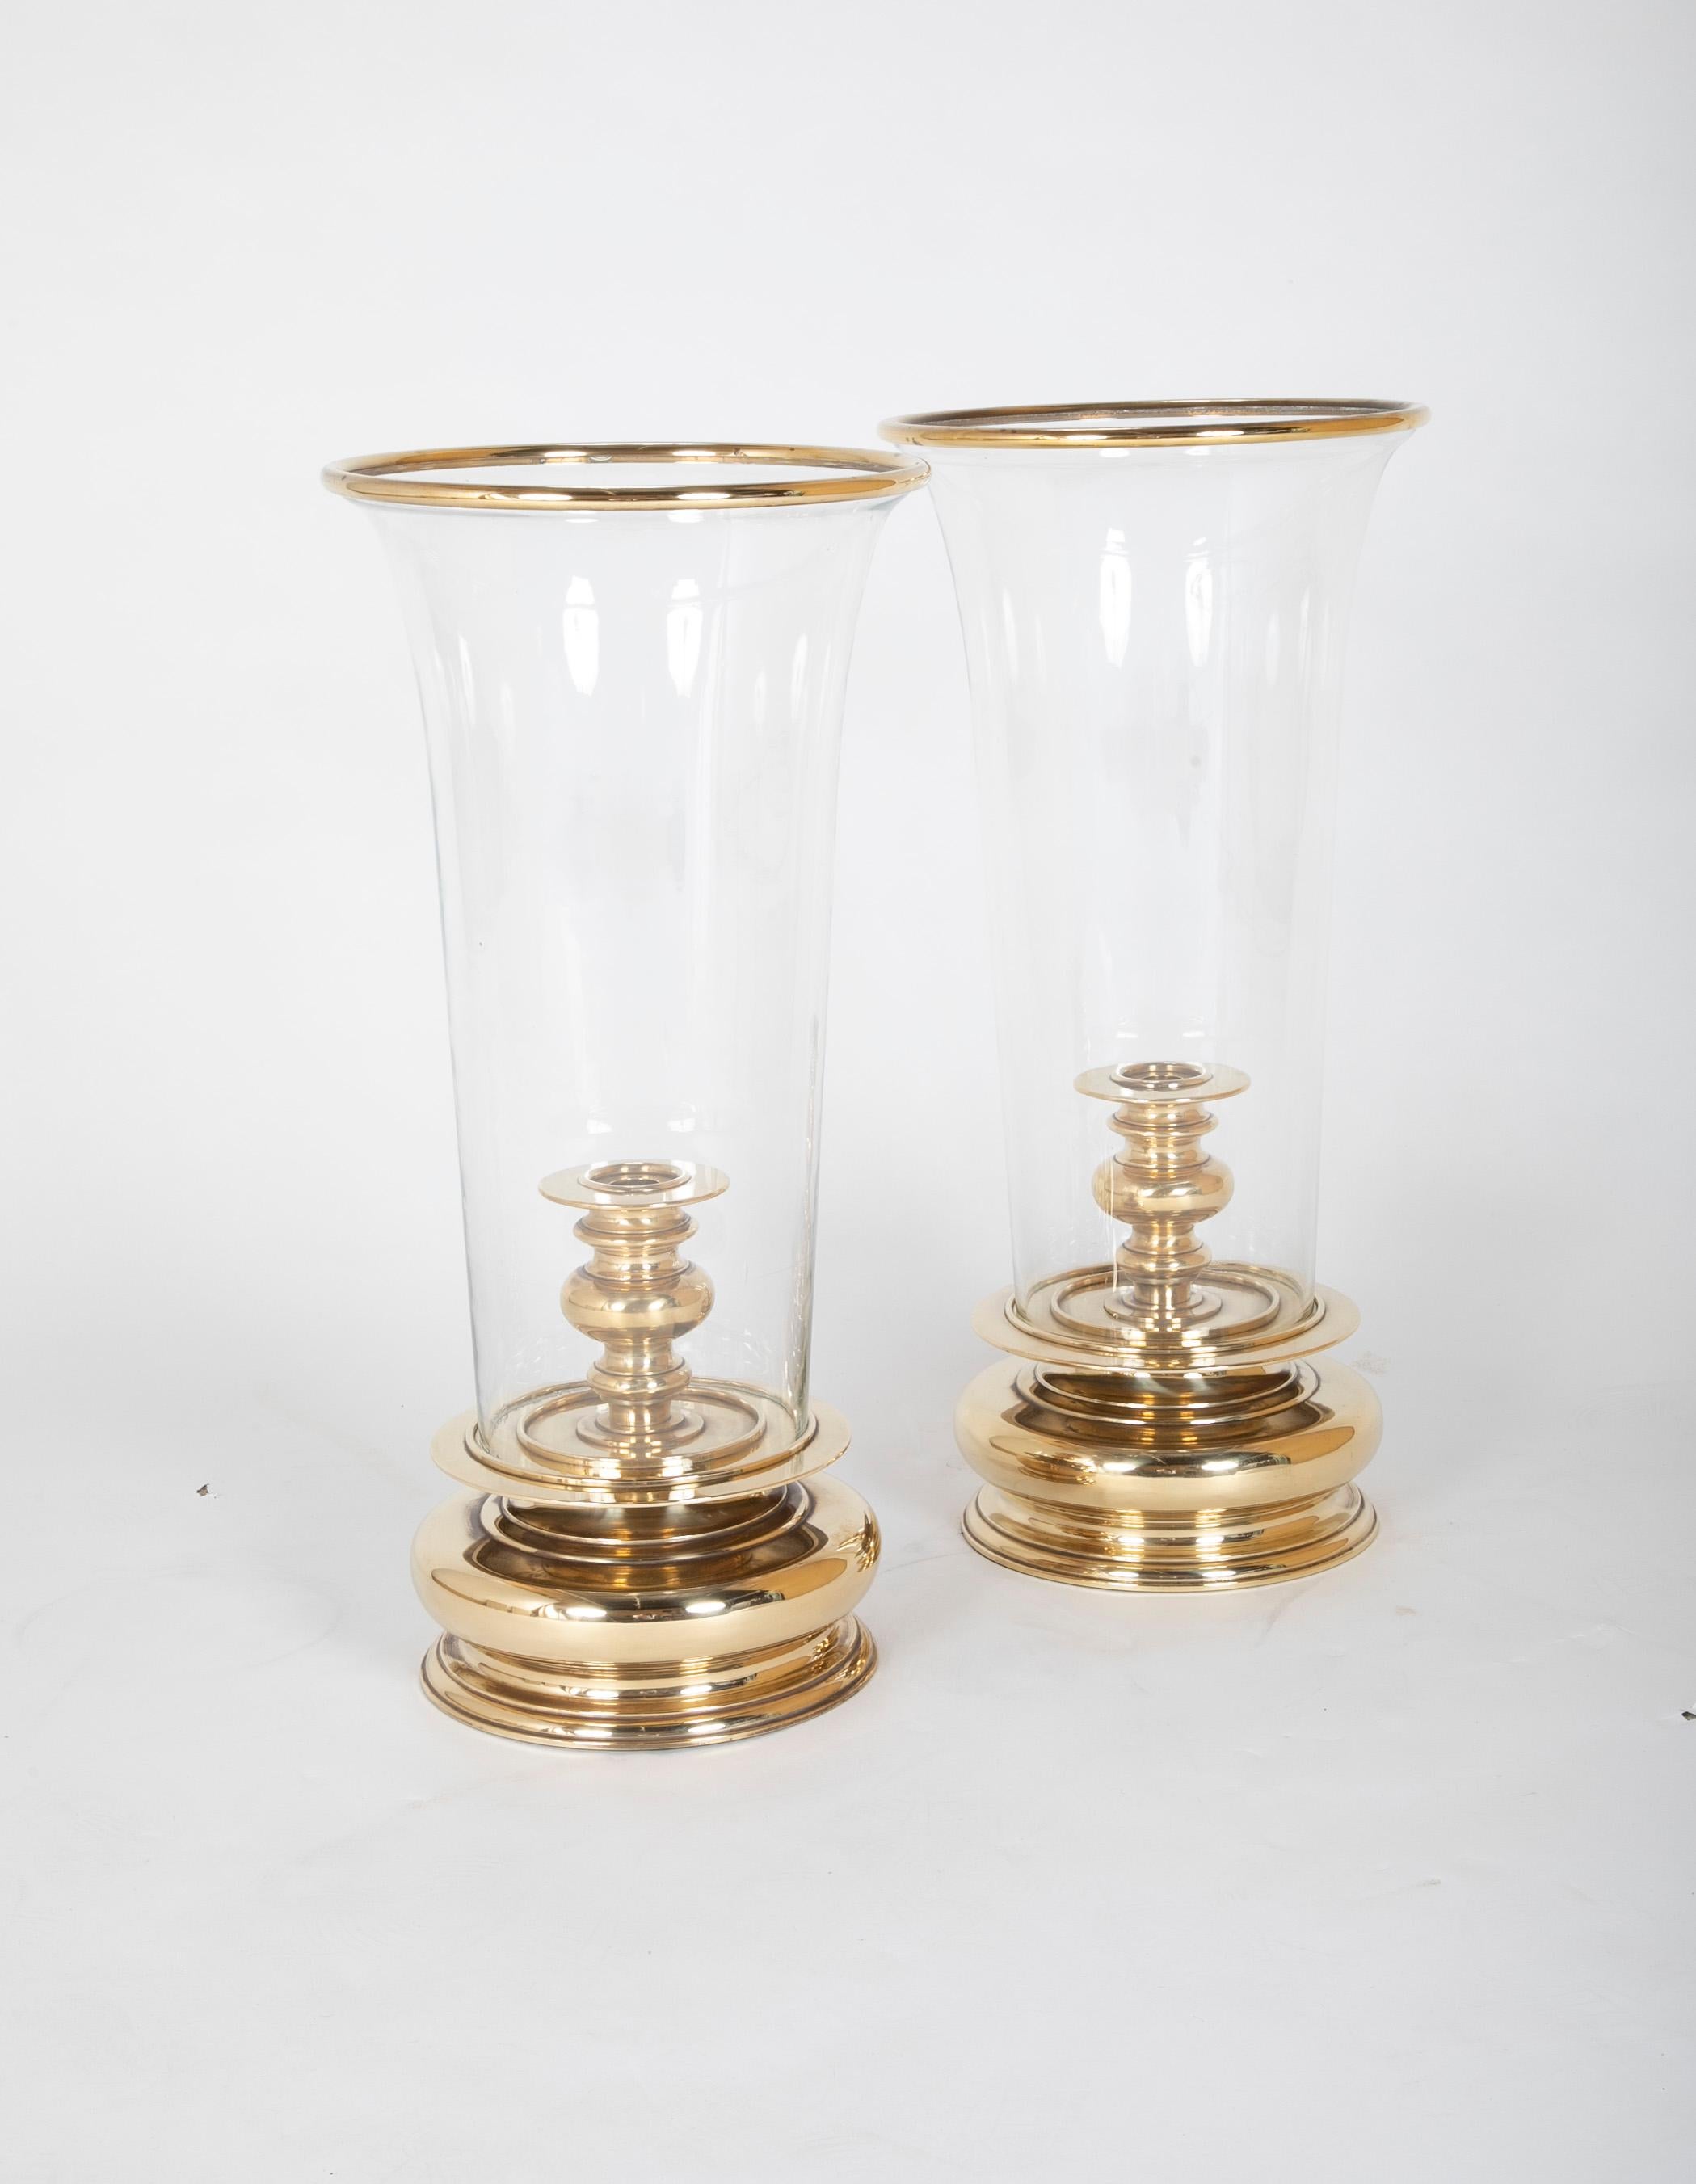 Impressive pair of large scale brass hurricane lamps with brass rimmed hand blown glass shades. The bases turned brass in a Dutch Baroque style but with a very modern look. Great for traditional or contemporary interiors. At over 2 feet tall and a